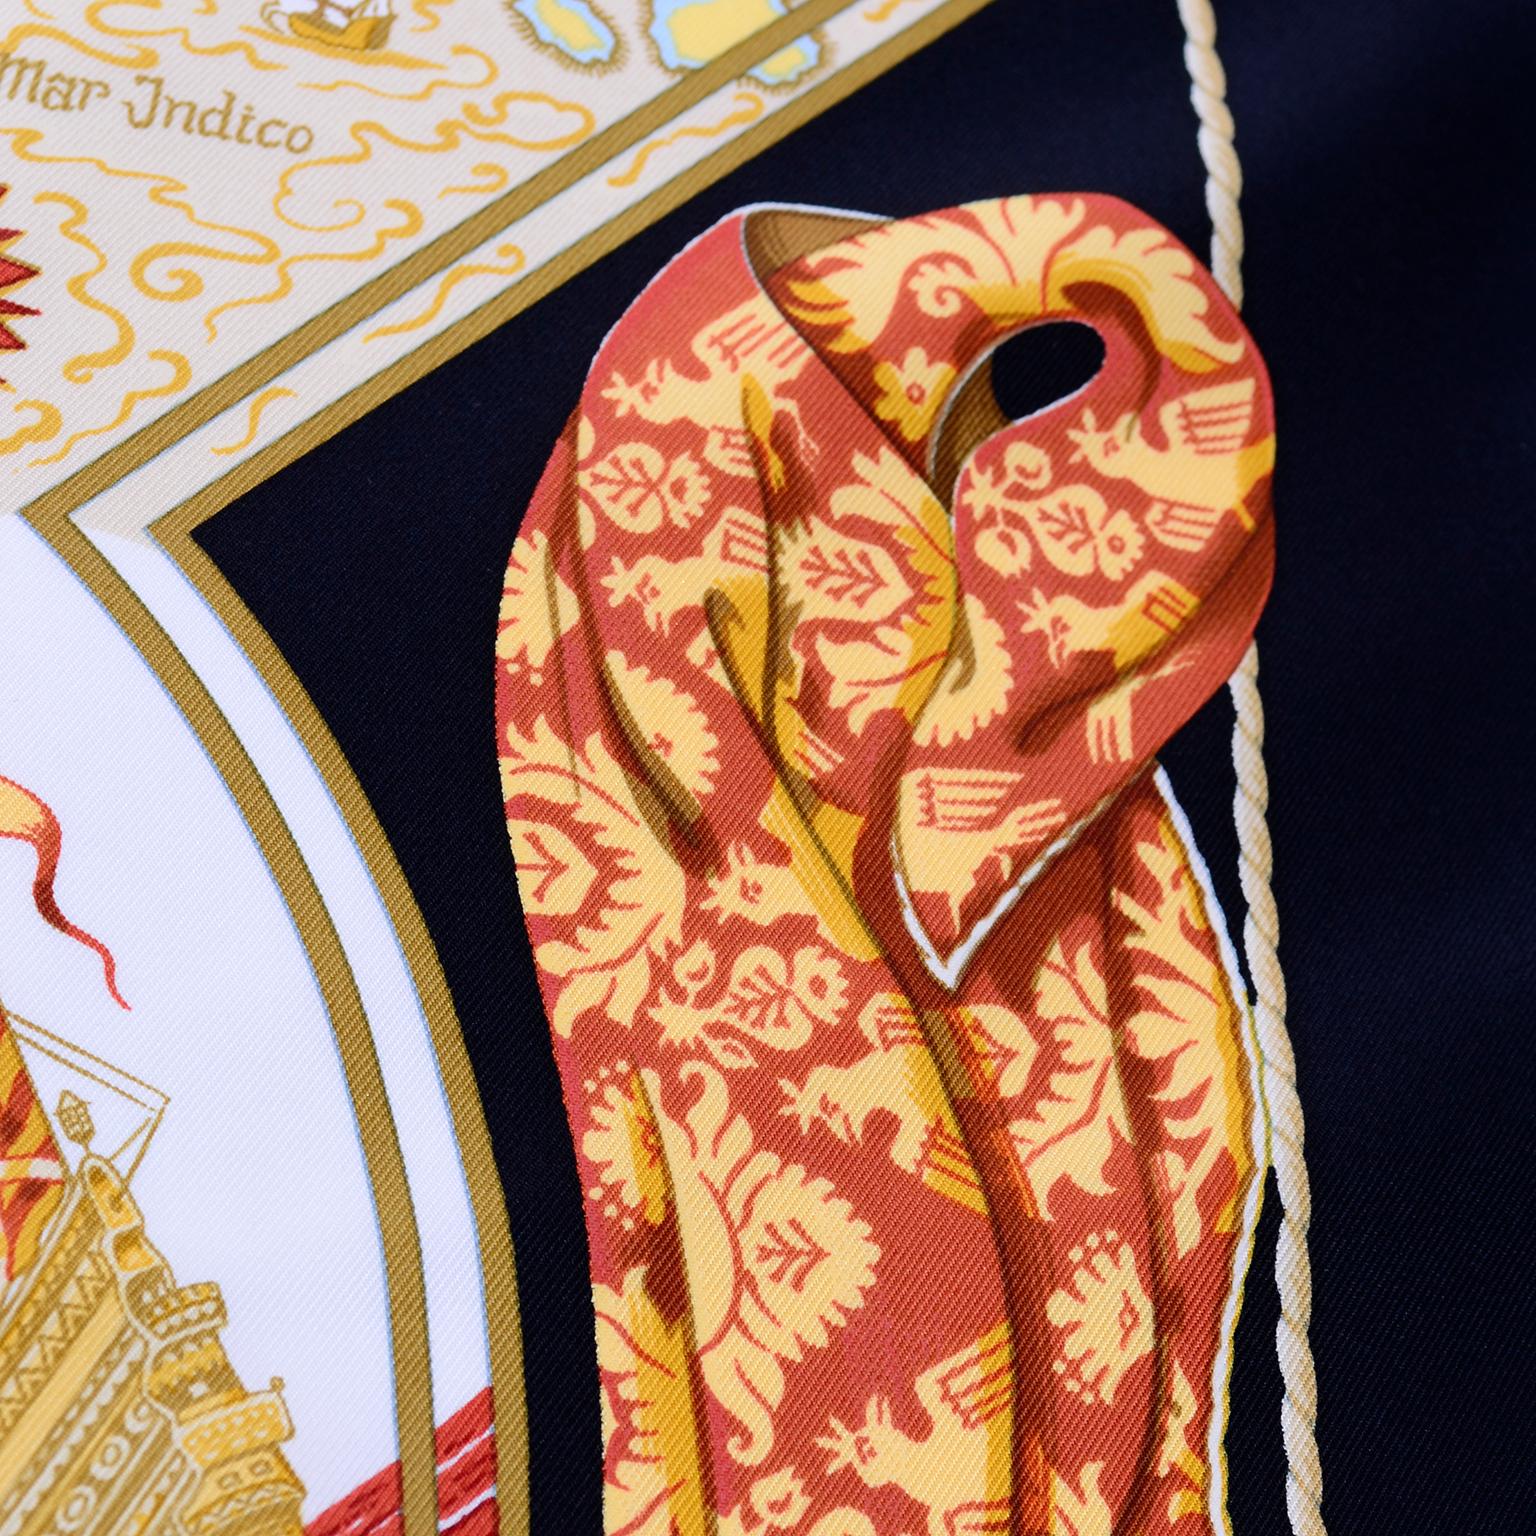 This is a lovely vintage Hermès Au-dela des cinq Mers silk scarf designed by Laurence Bourthoumieux in 1998.  This approximately 36